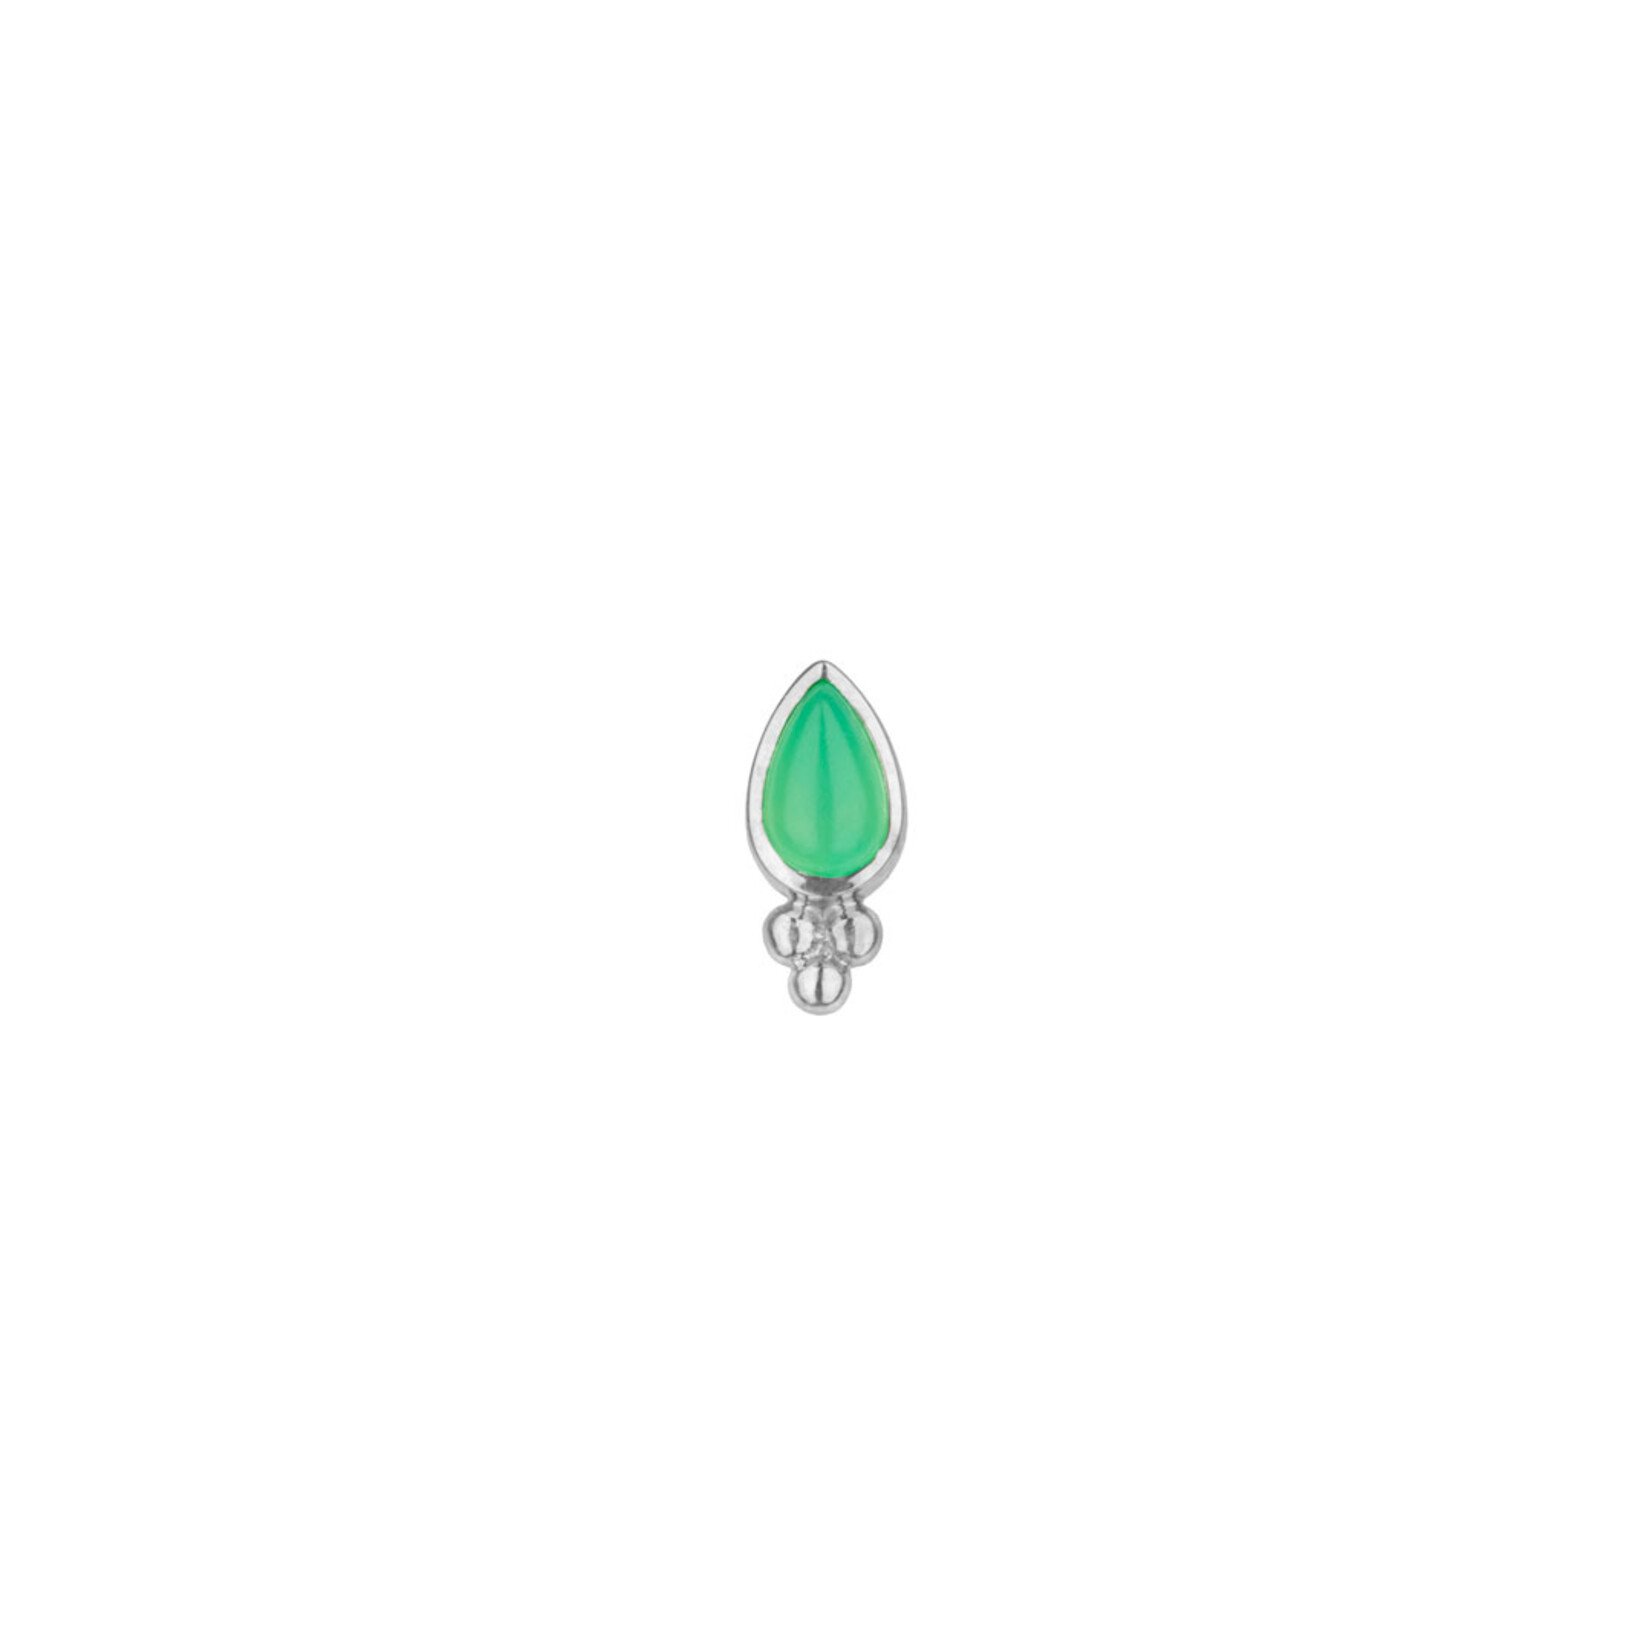 BVLA BVLA white gold "Beaded pear bezel" threaded end with chrysoprase